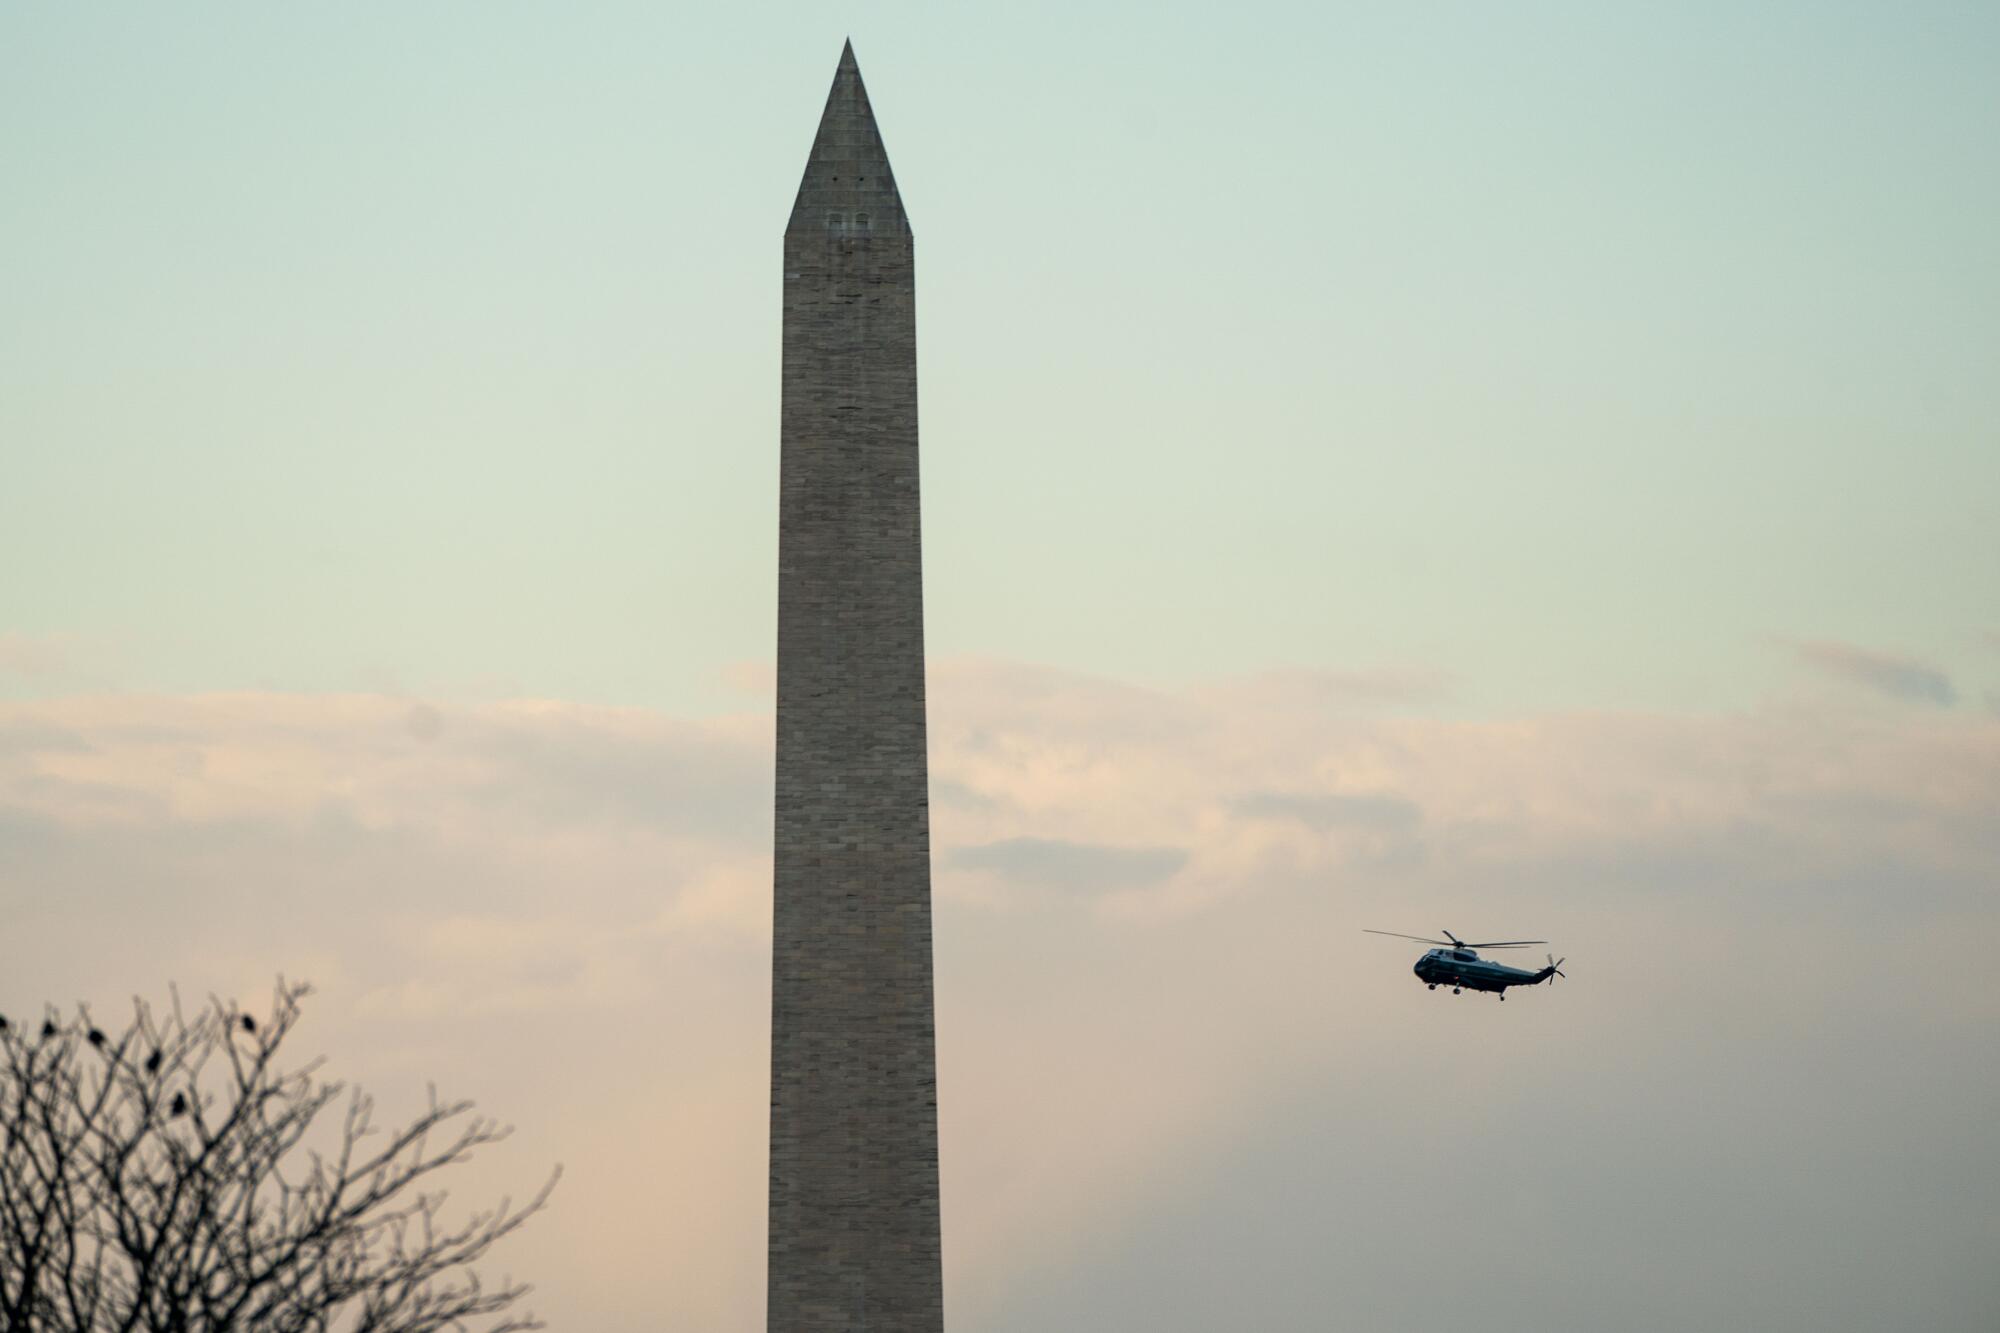 Marine One with President Trump and First Lady Melania Trump aboard flies past the Washington Monument.